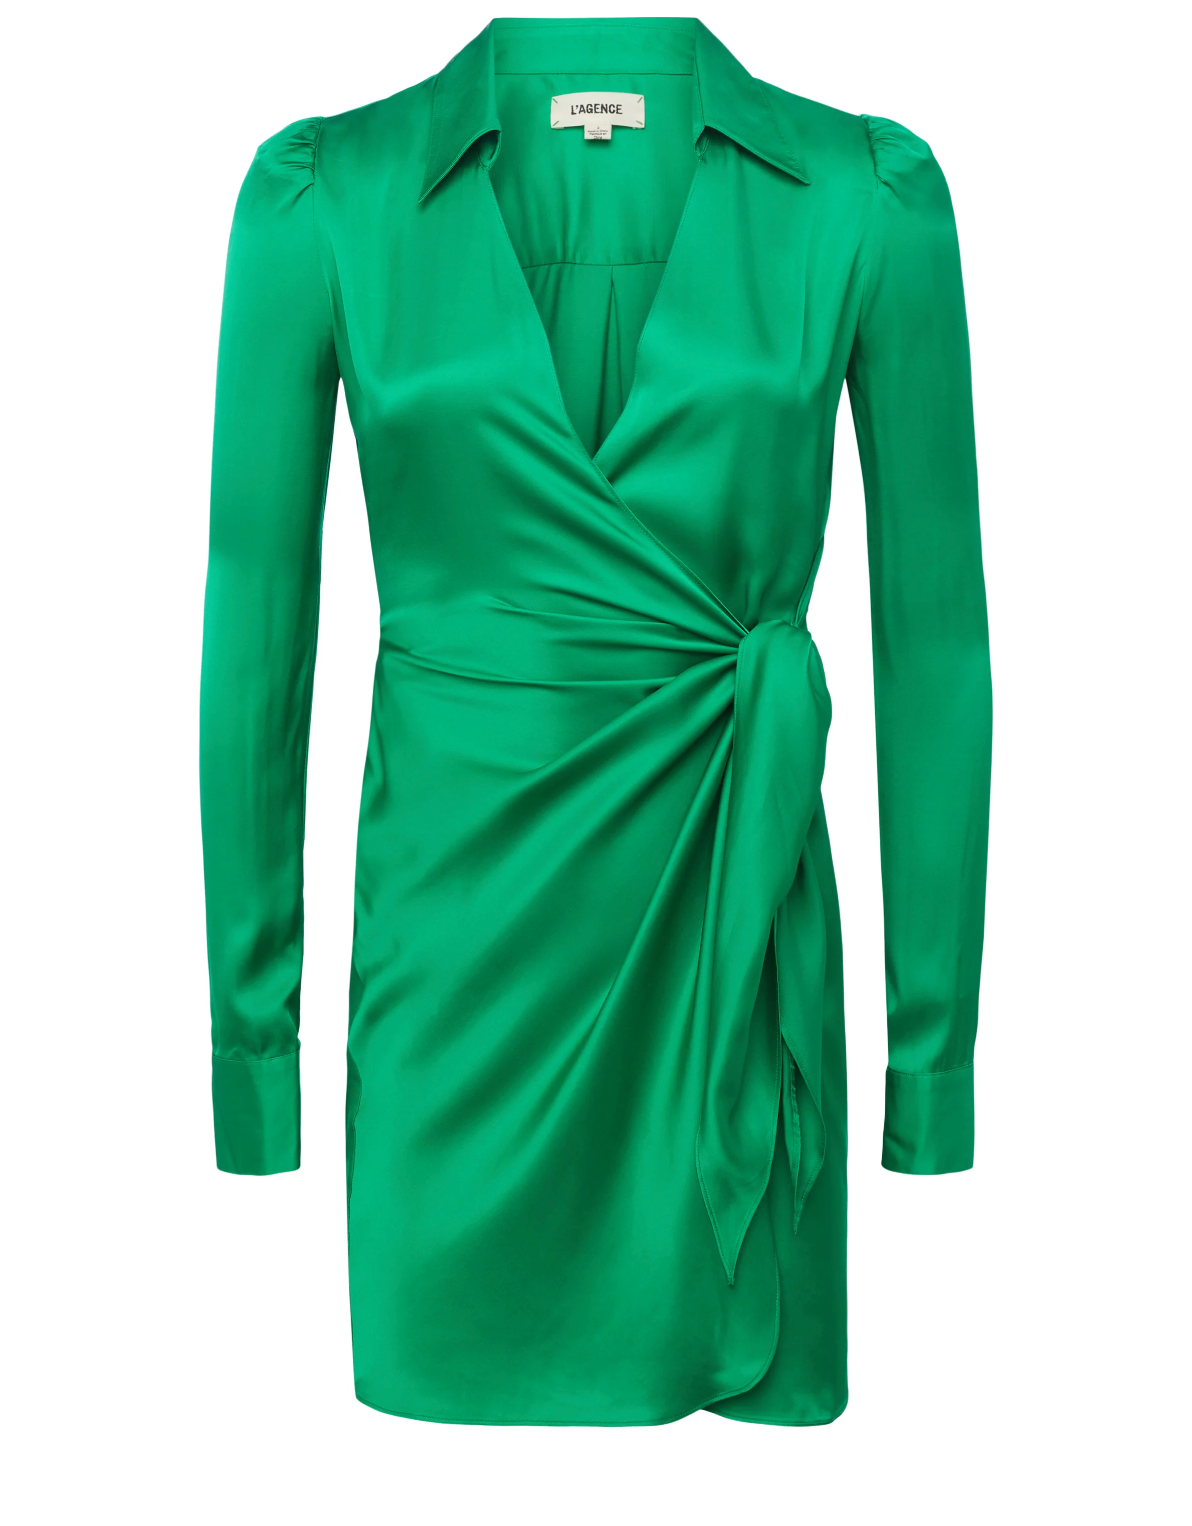 AMANI WRAP DRESS IN GRASS GREEN - Romi Boutique